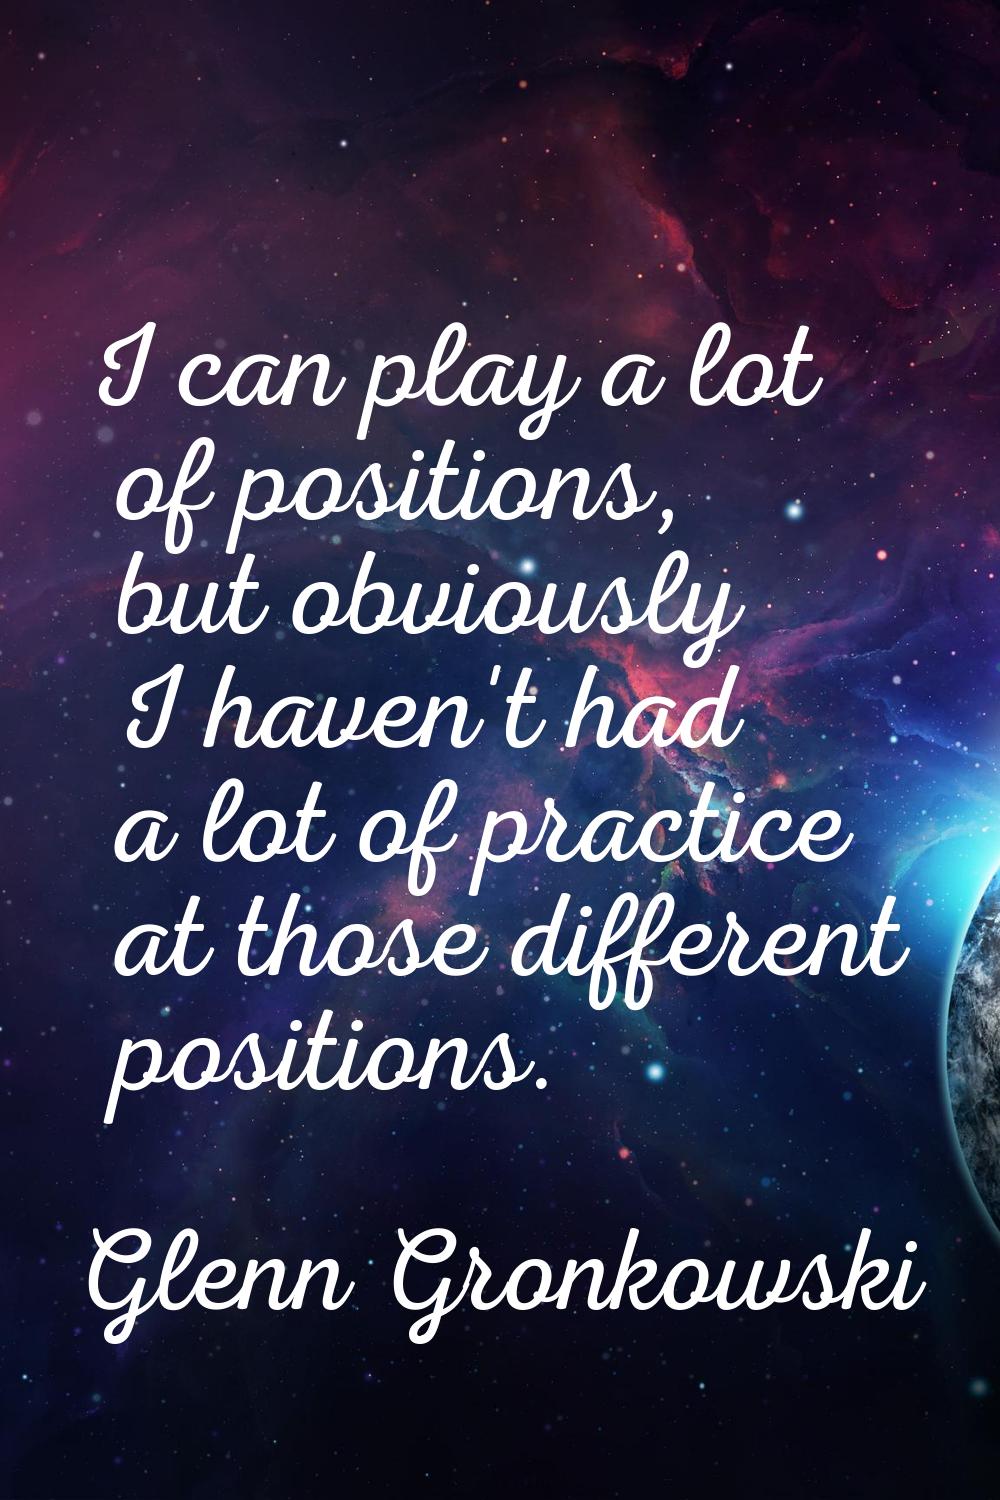 I can play a lot of positions, but obviously I haven't had a lot of practice at those different pos